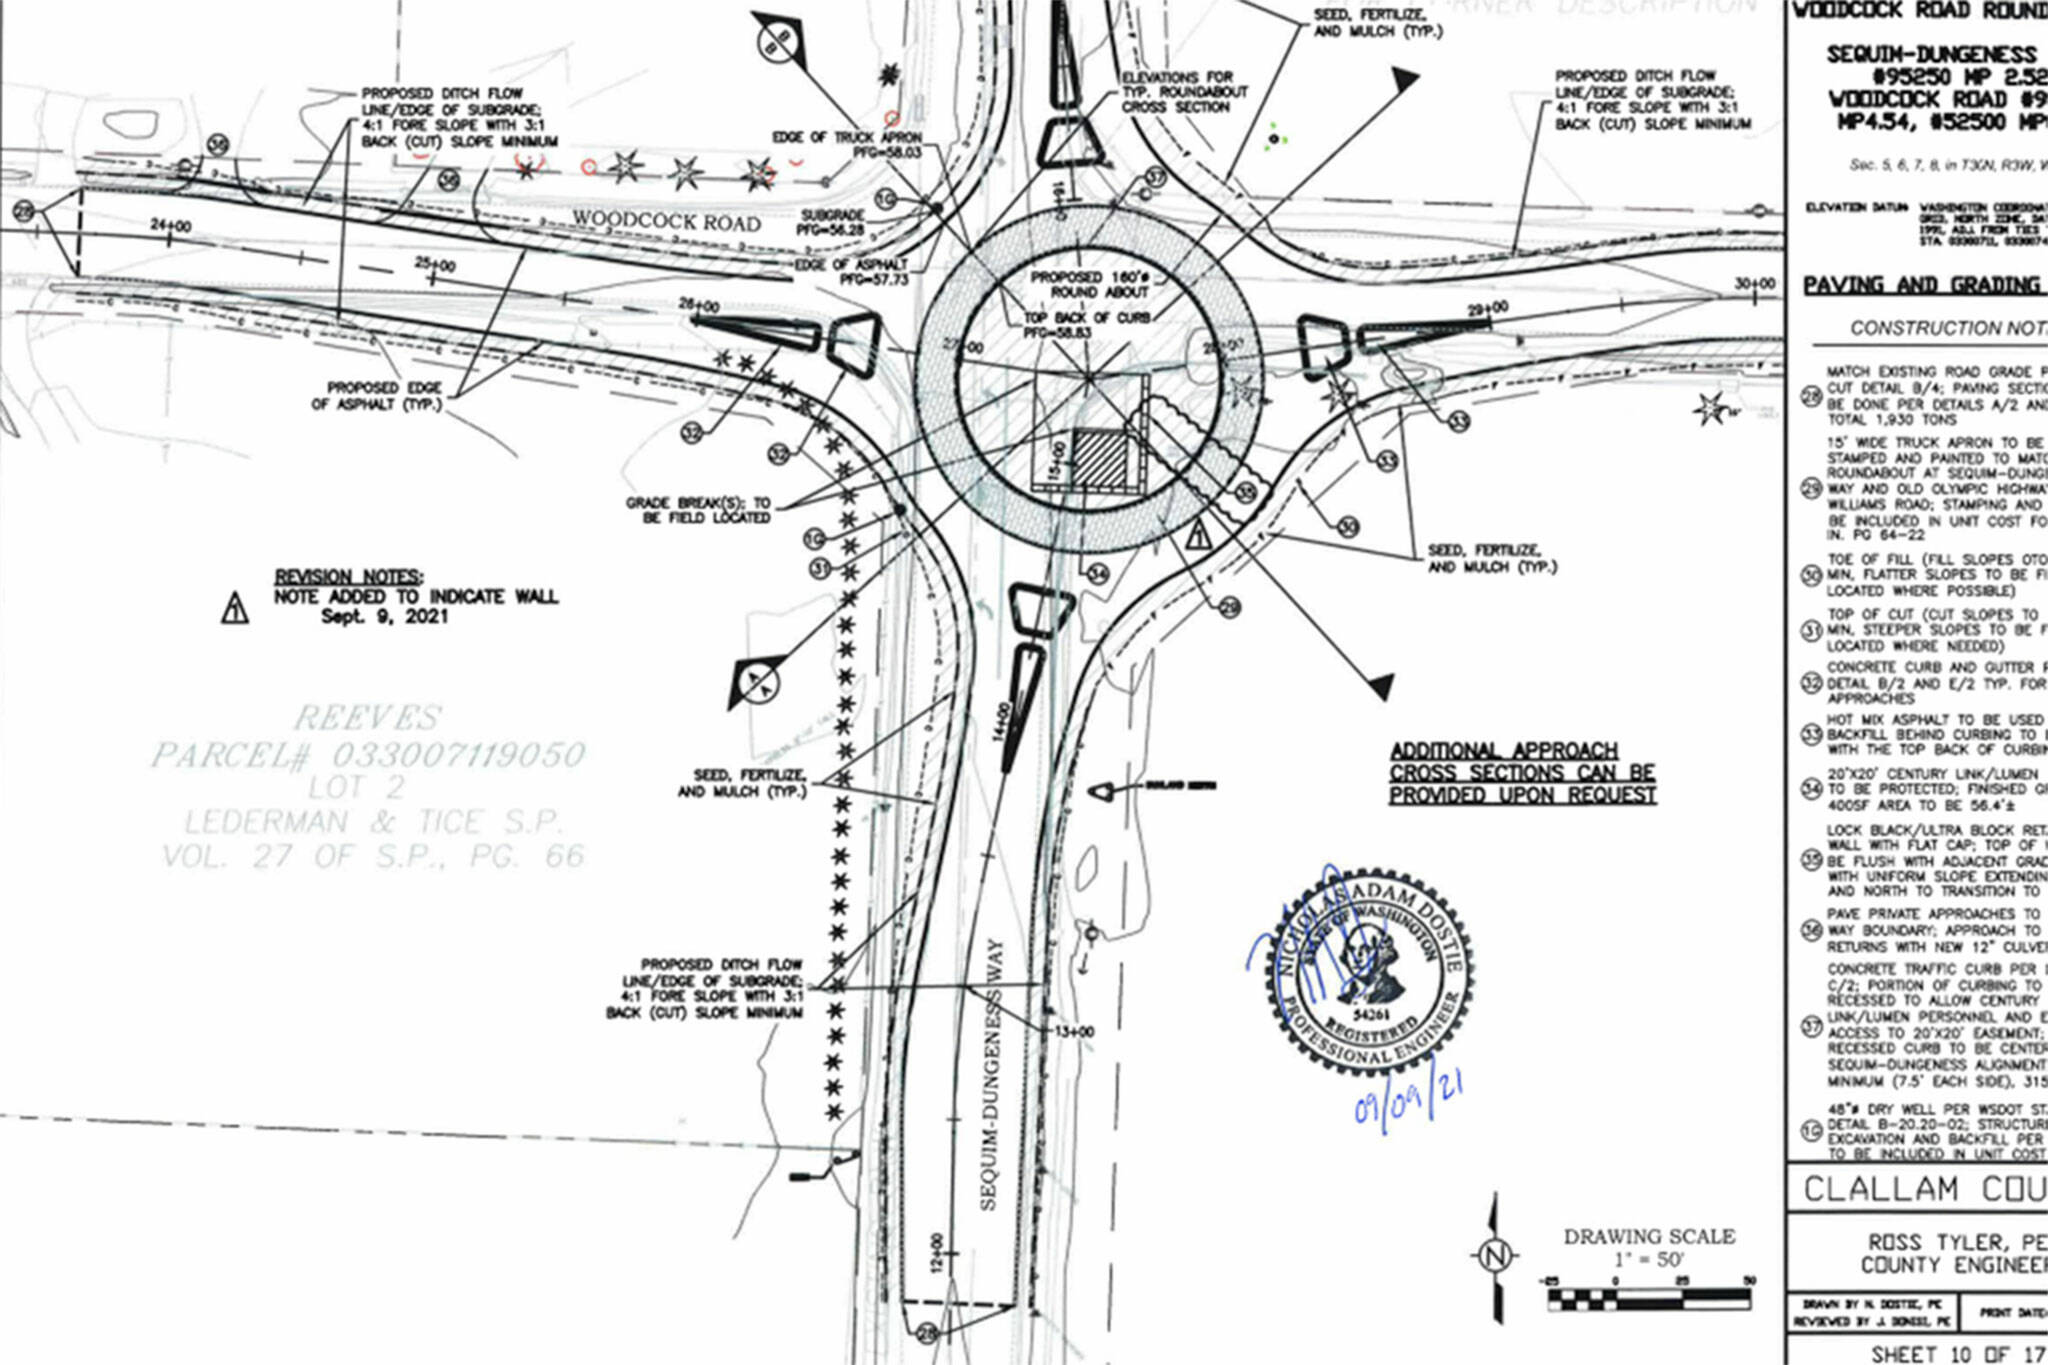 The Sequim-Dungeness Way and Woodcock Road roundabout will be about 160 feet in diameter. Graphic courtesy of Clallam County